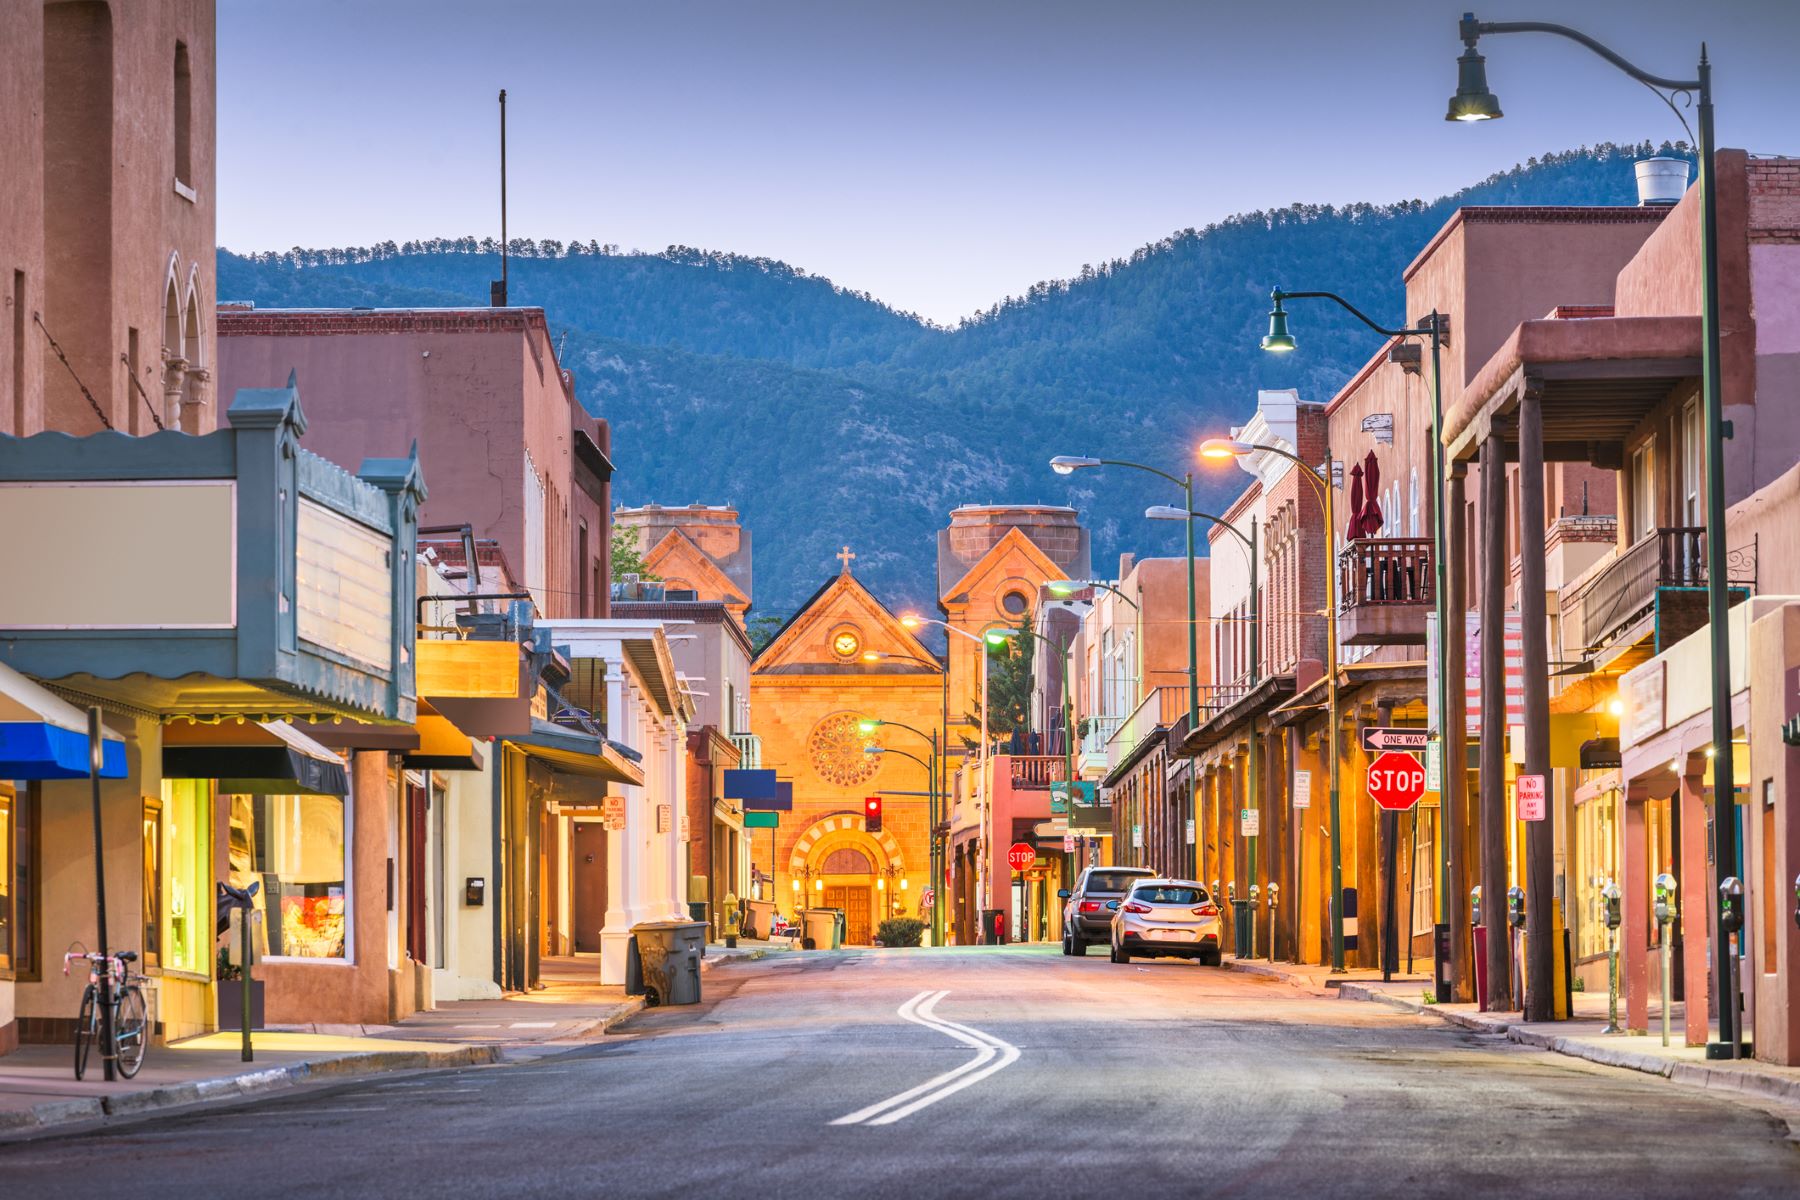 6 Places You Need To See In The Santa Fe Historic District Four